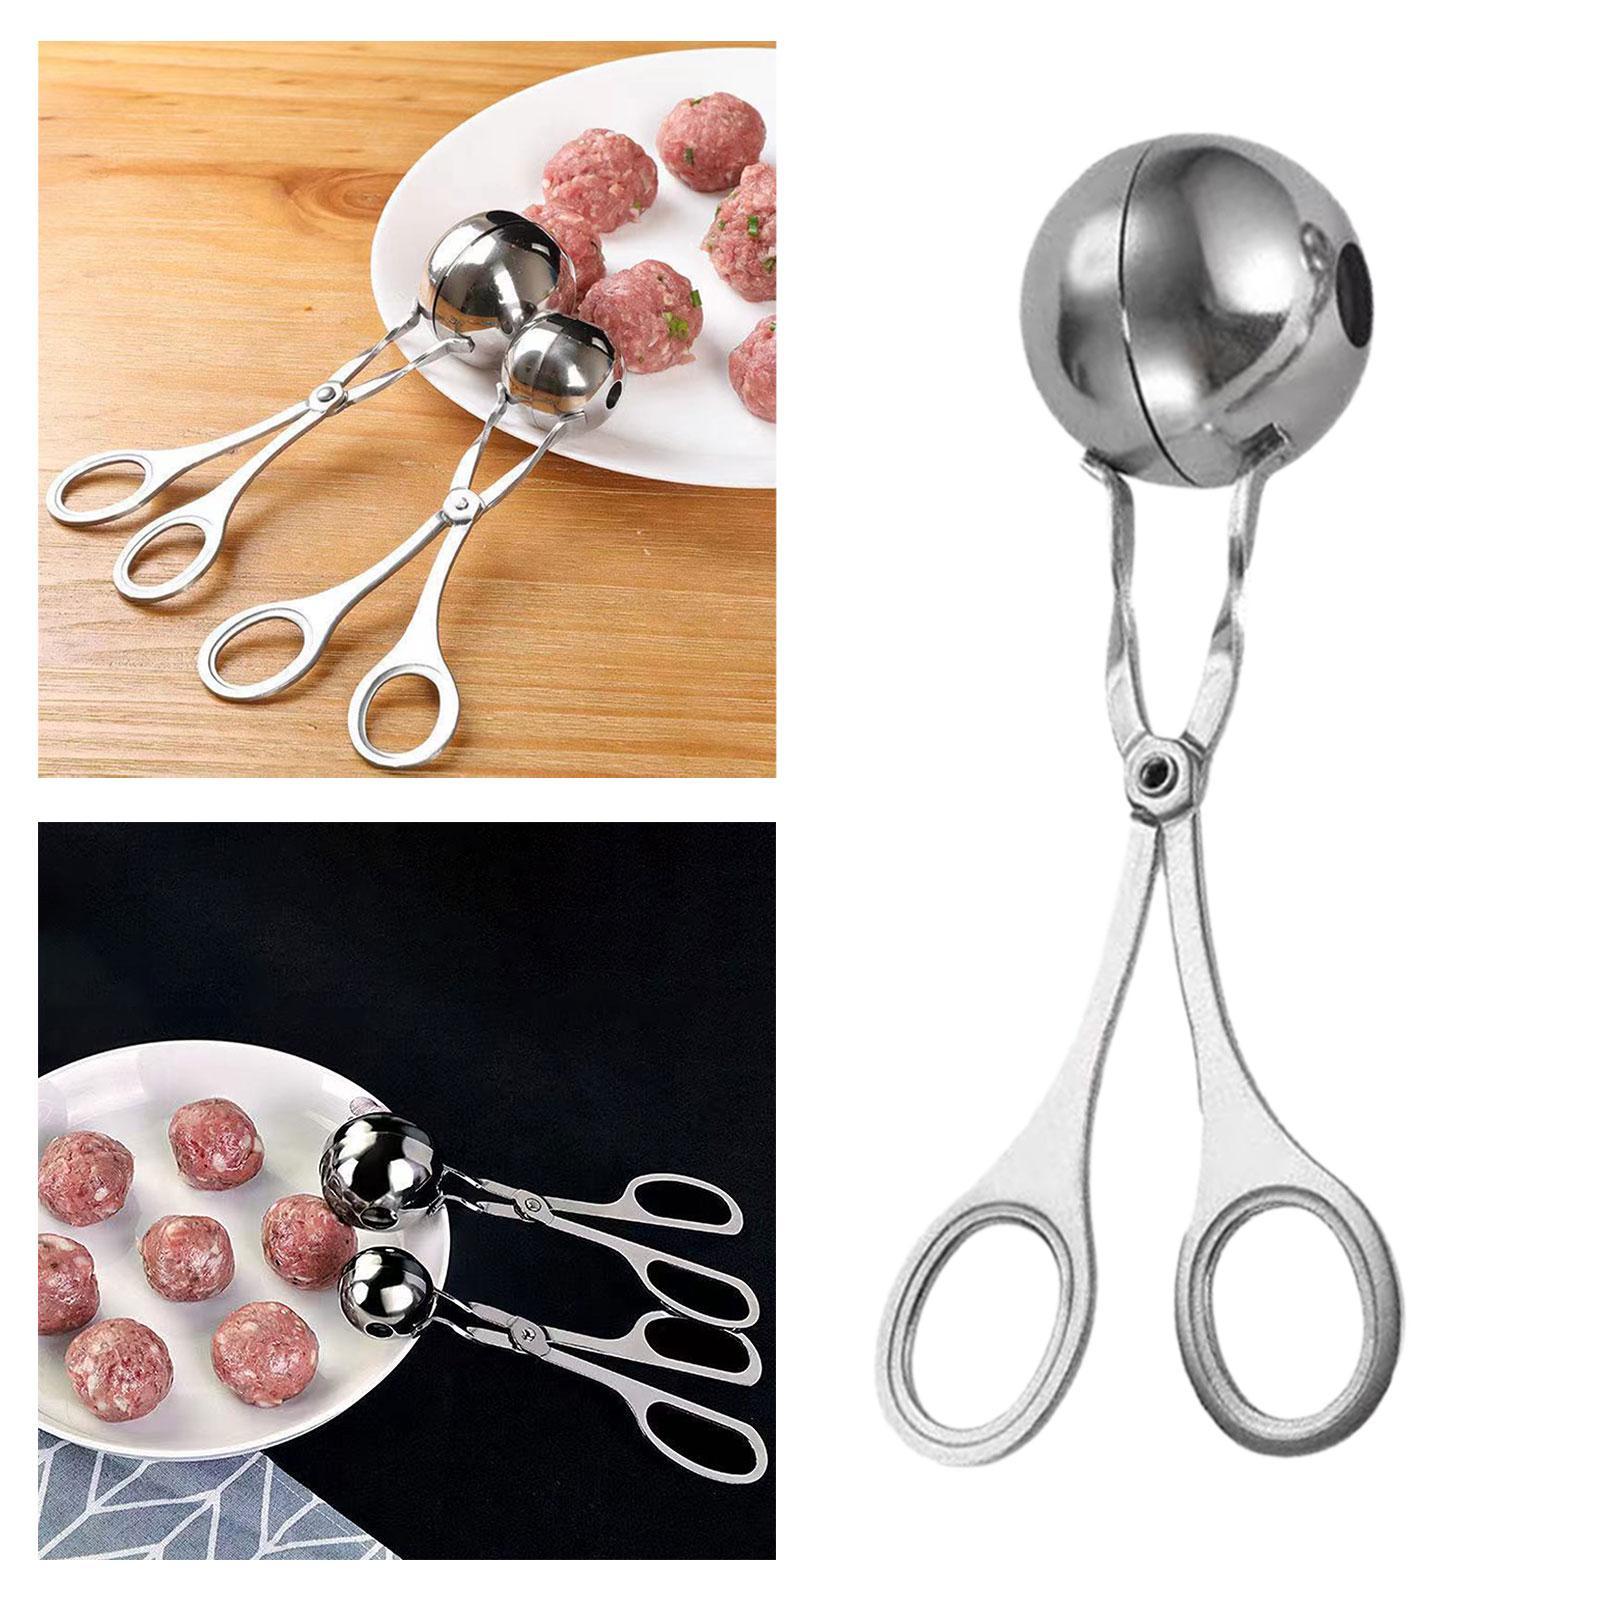 Stainless Steel Meatball Maker Spoon Meat Tools for Cooking Hotel Restaurant